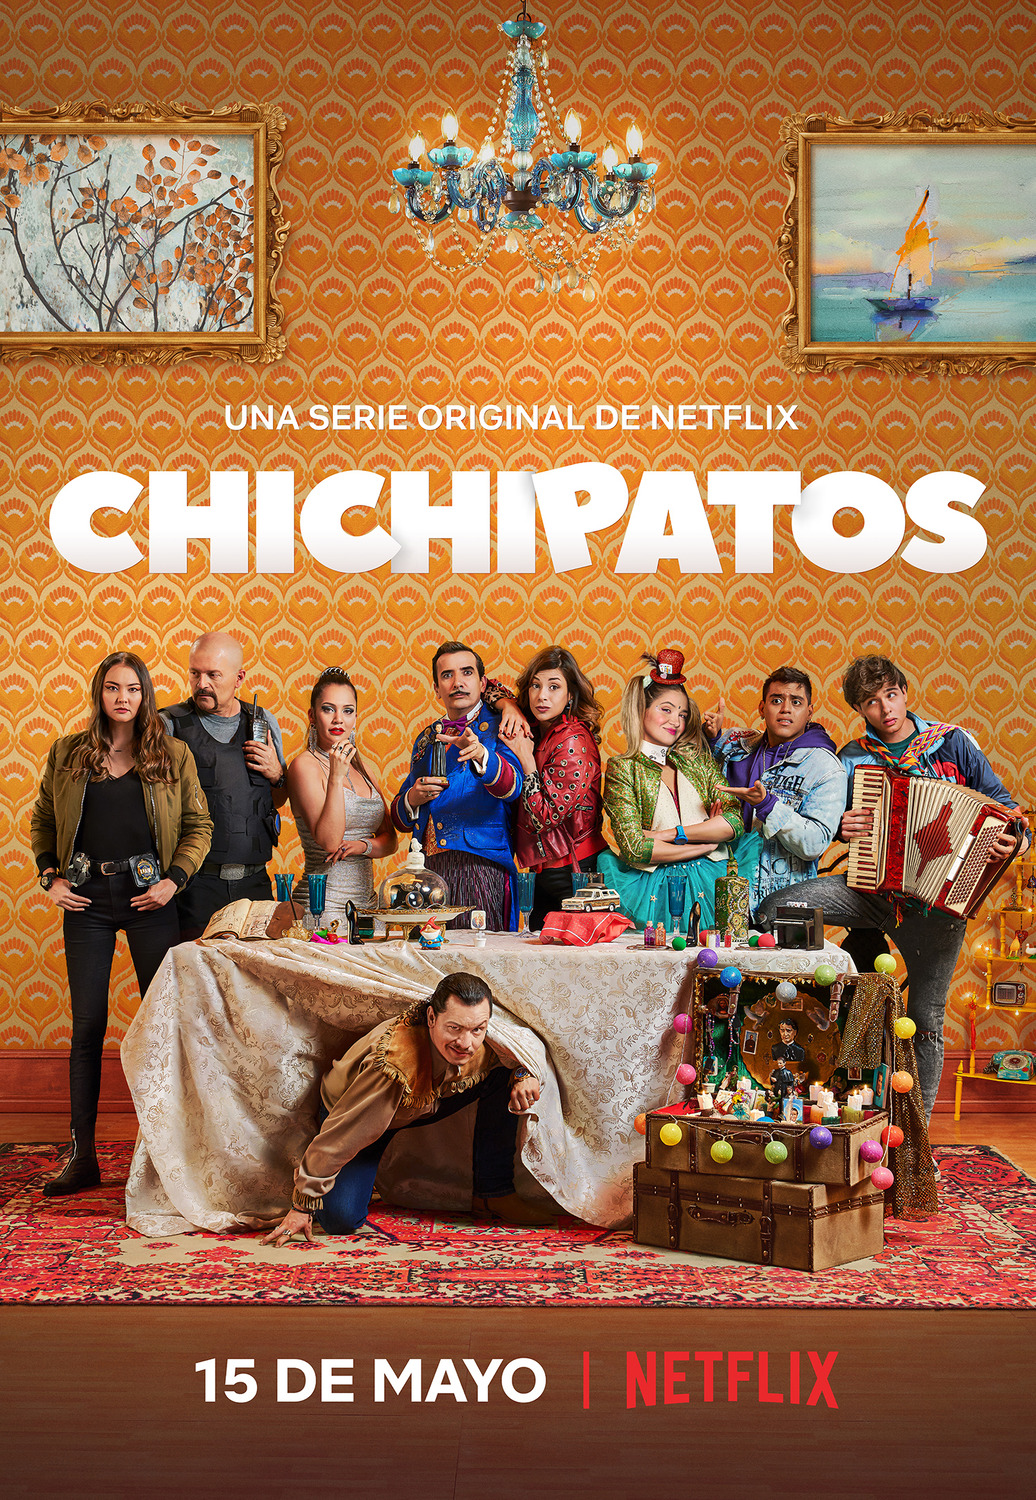 Extra Large TV Poster Image for Chichipatos 